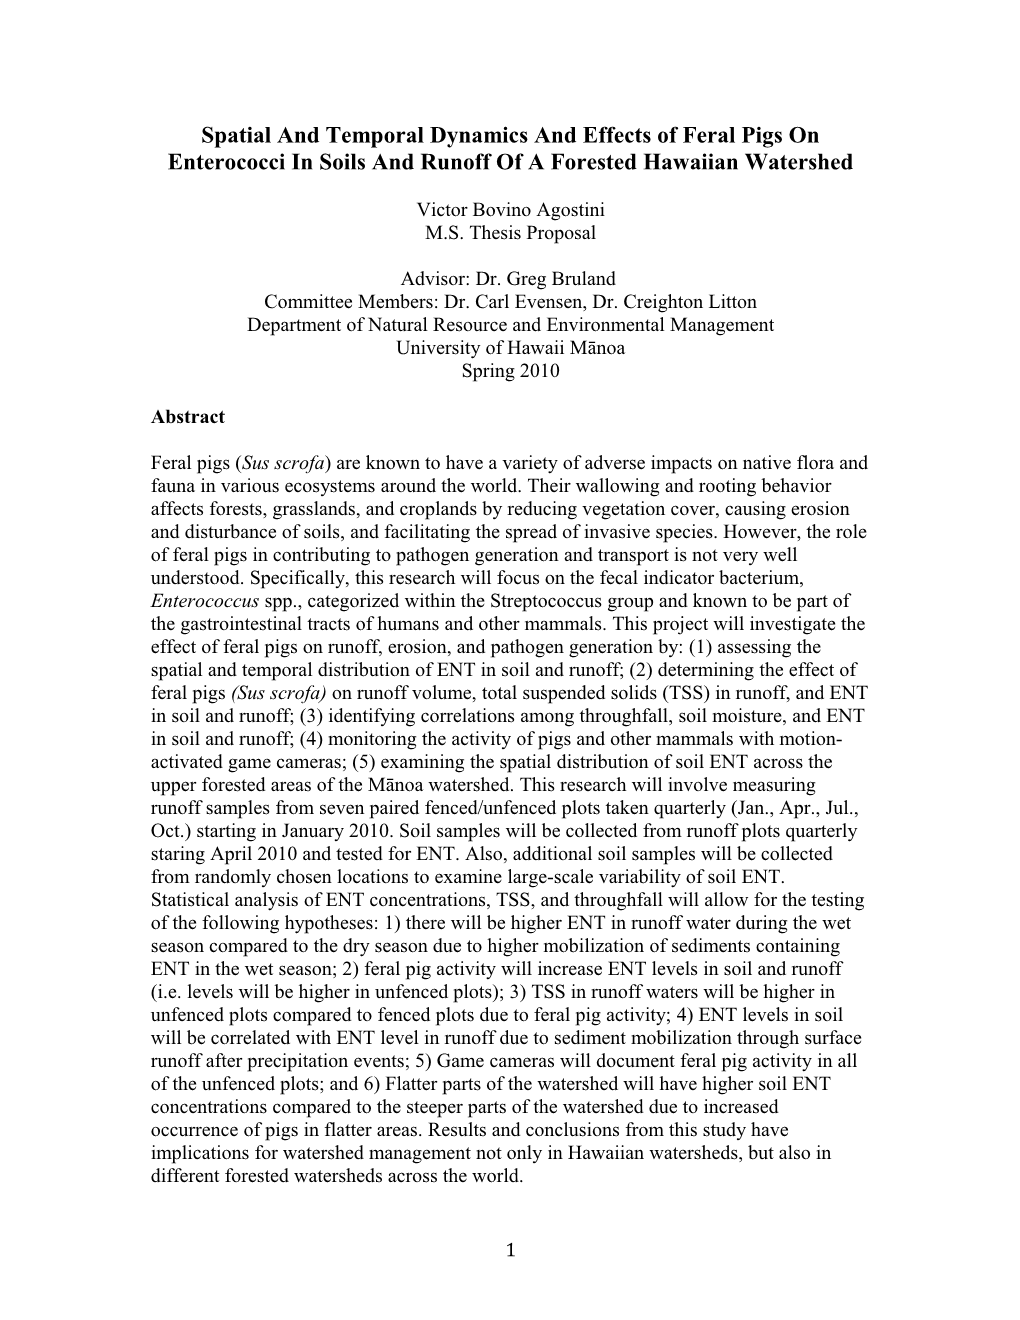 Spatial and Temporal Dynamics and Effects of Feral Pigs on Enterococci in Soils and Runoff